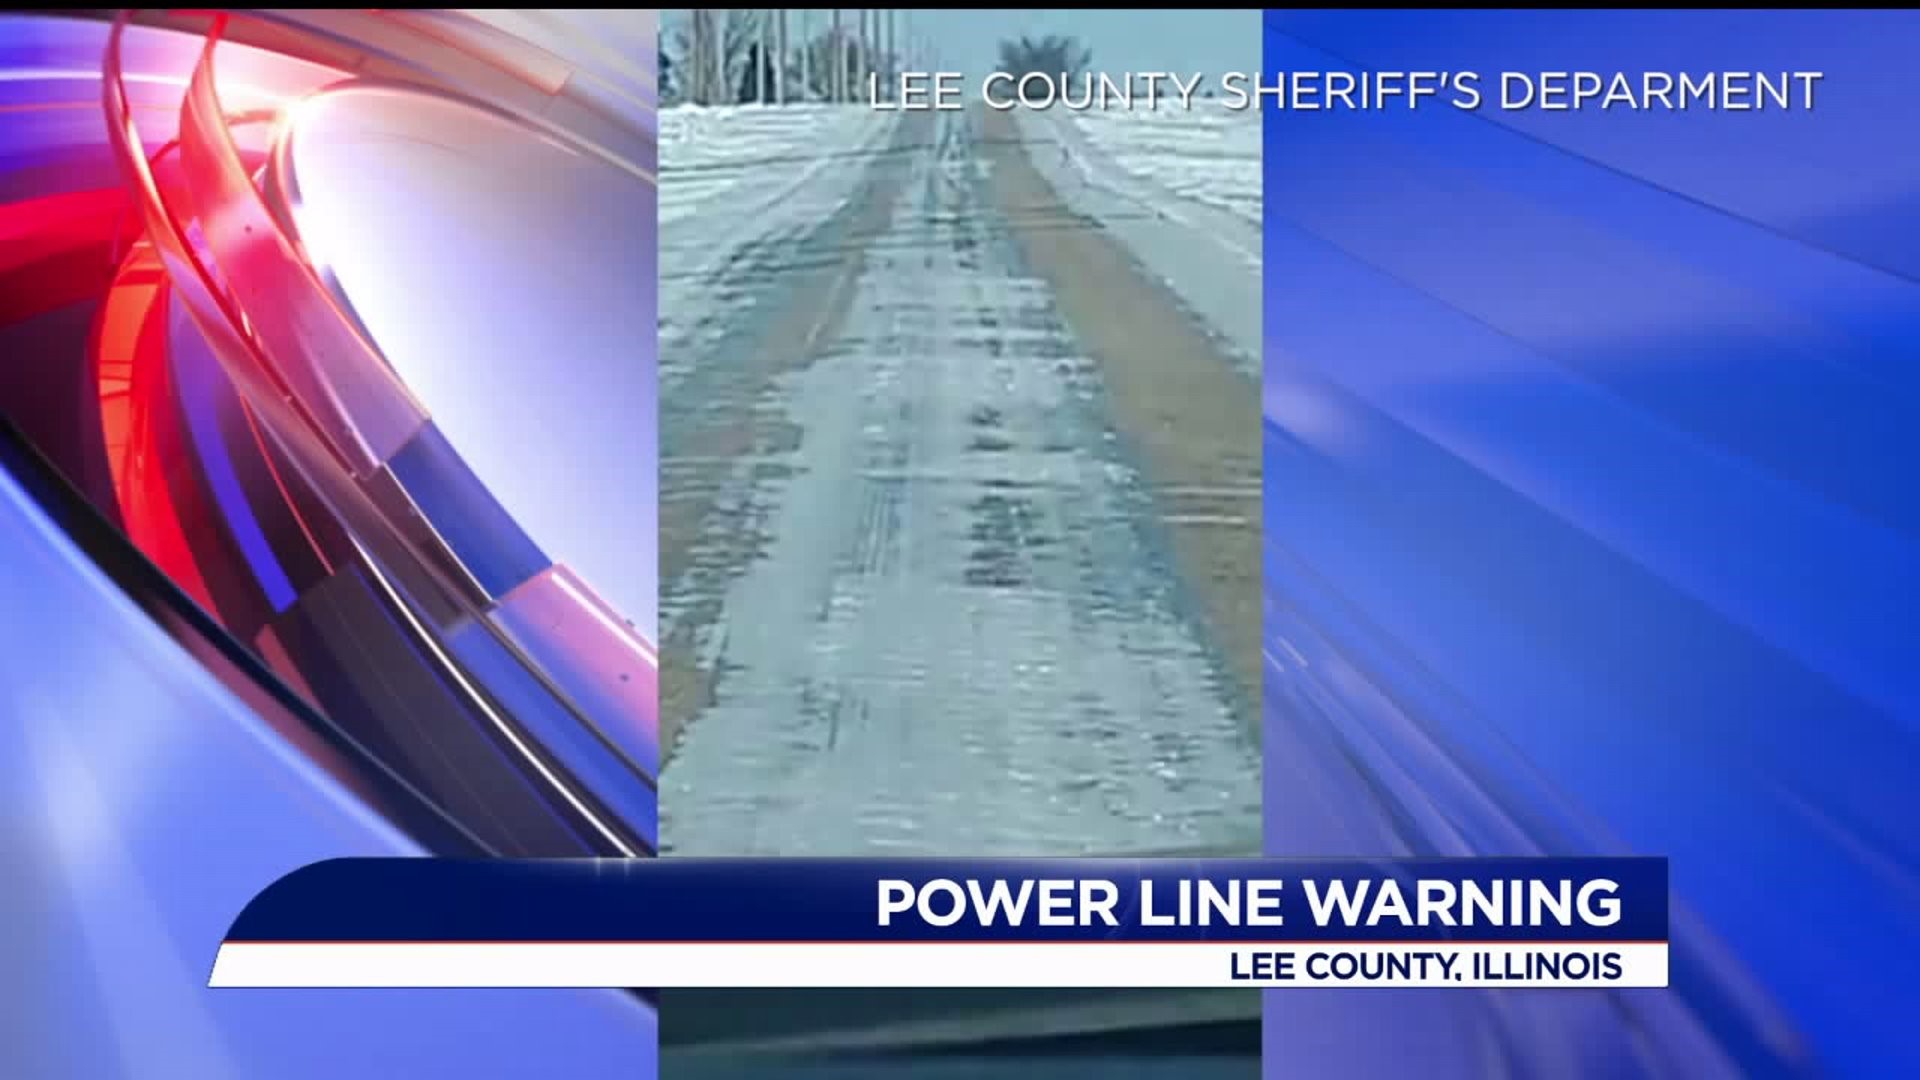 Lee County Sheriff`s Department in IL warns citizens of downed power lines